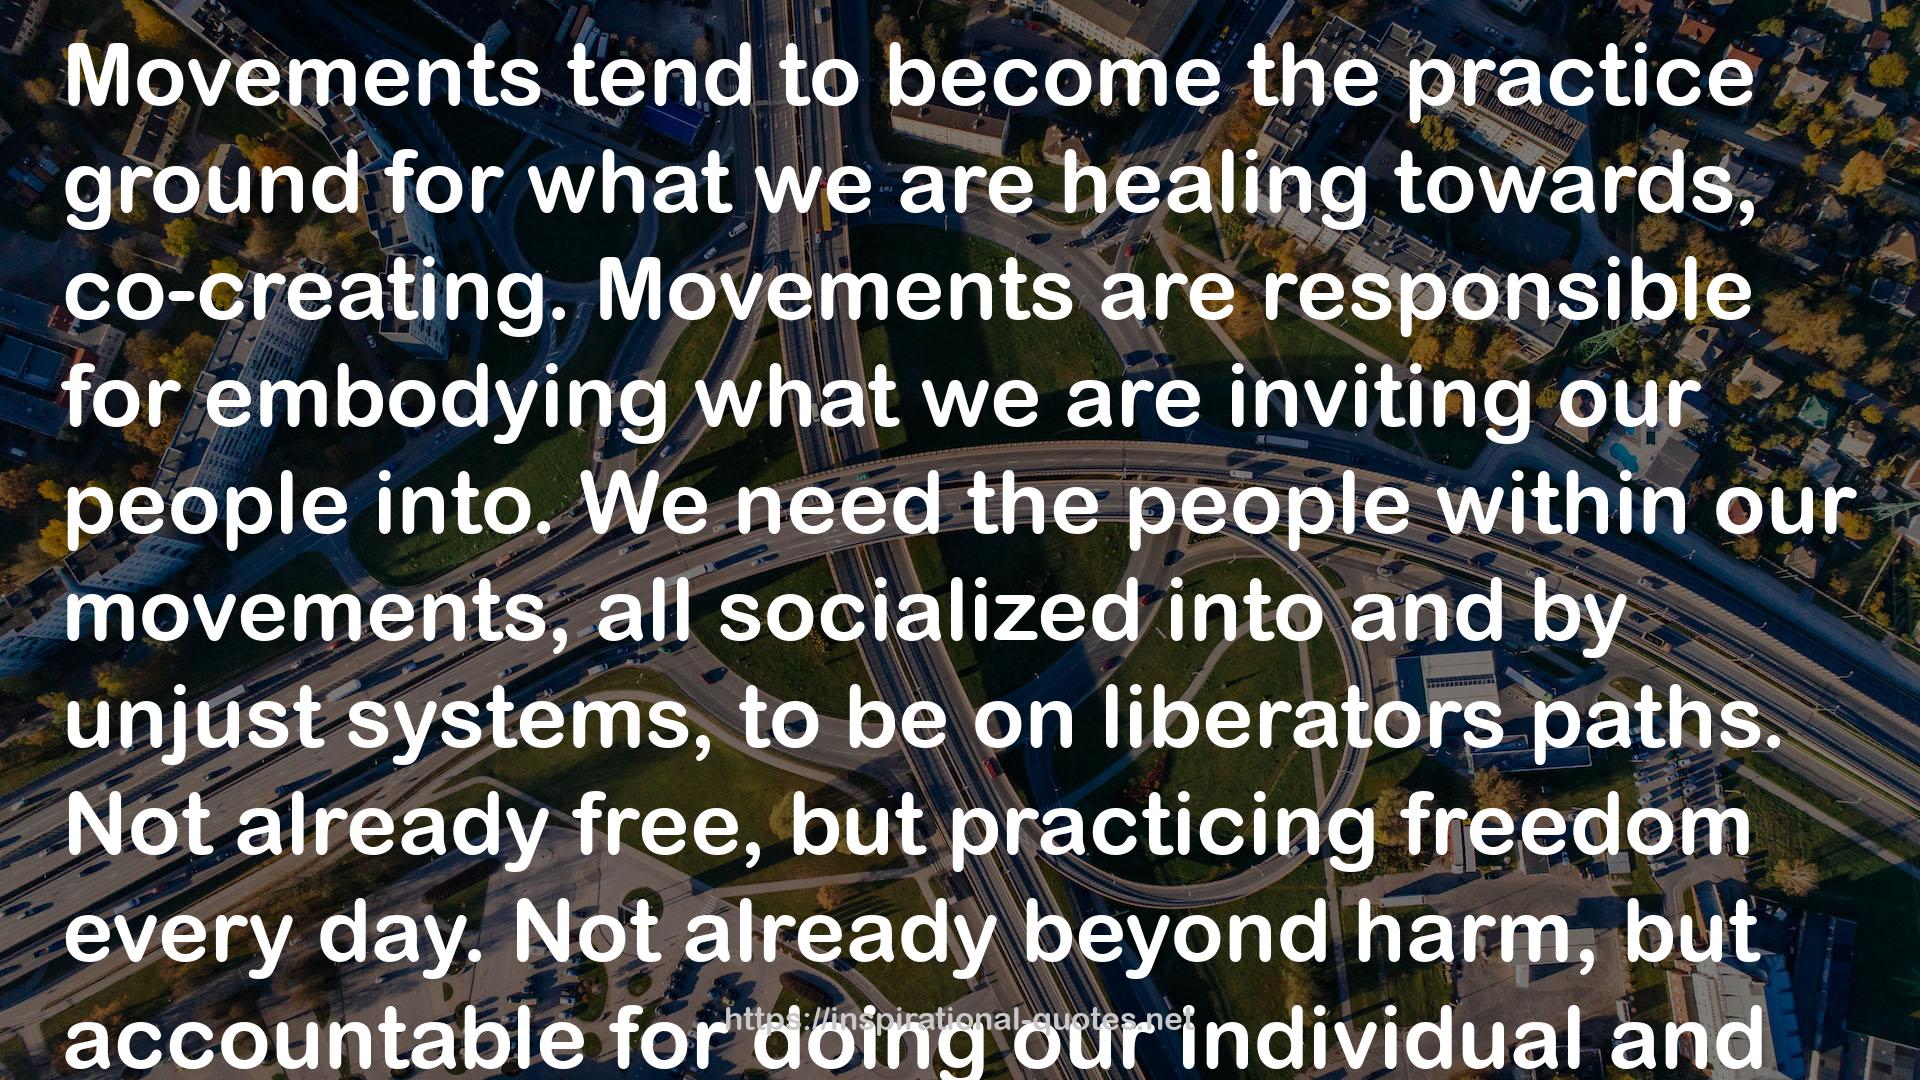 We Will Not Cancel Us: And Other Dreams of Transformative Justice (Emergent Strategy) QUOTES